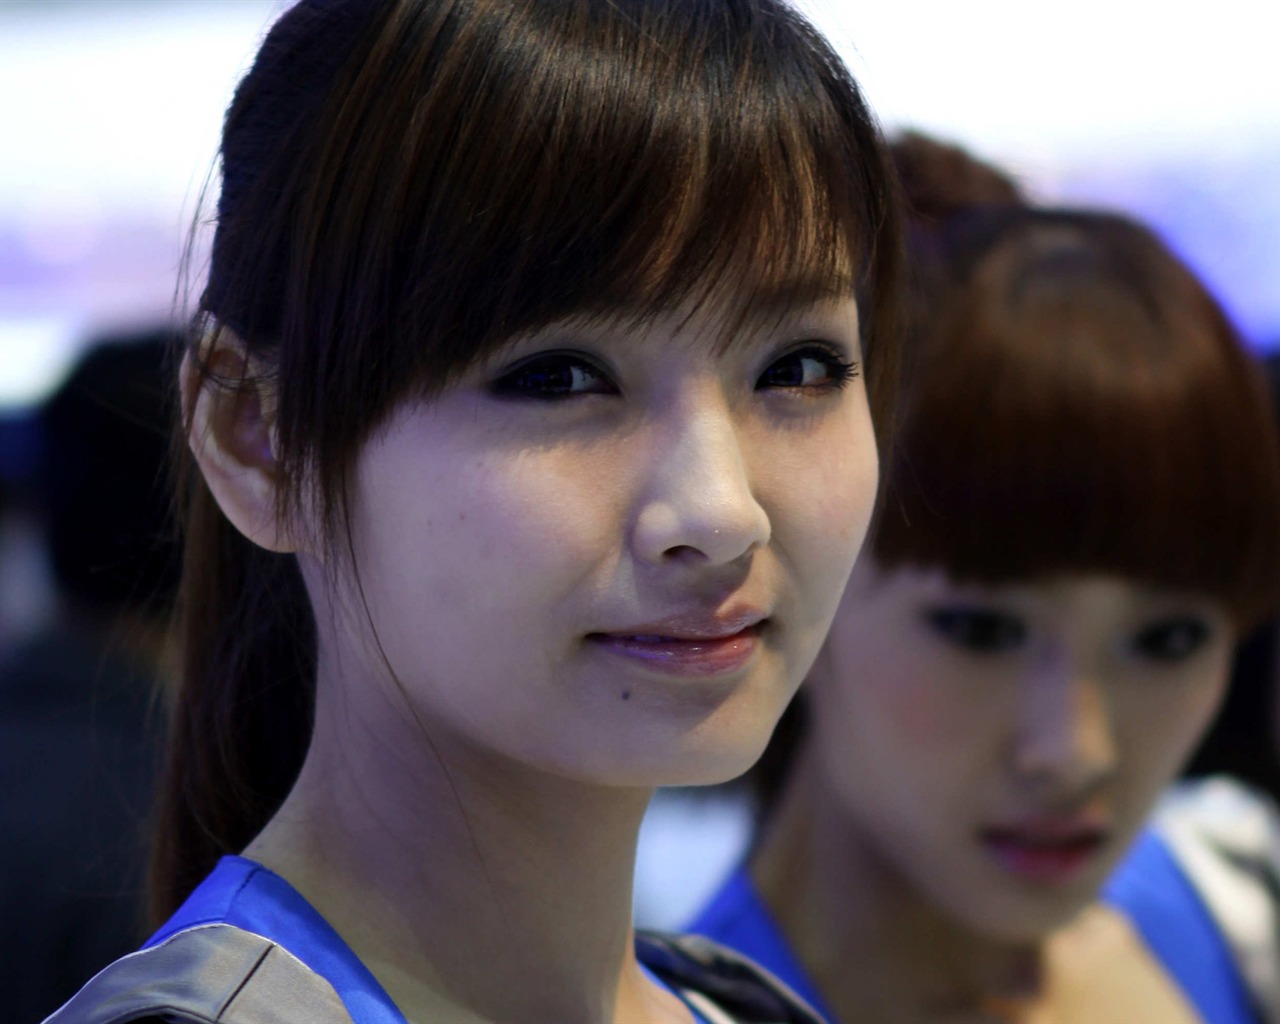 2010 Beijing Auto Show car models Collection (2) #3 - 1280x1024